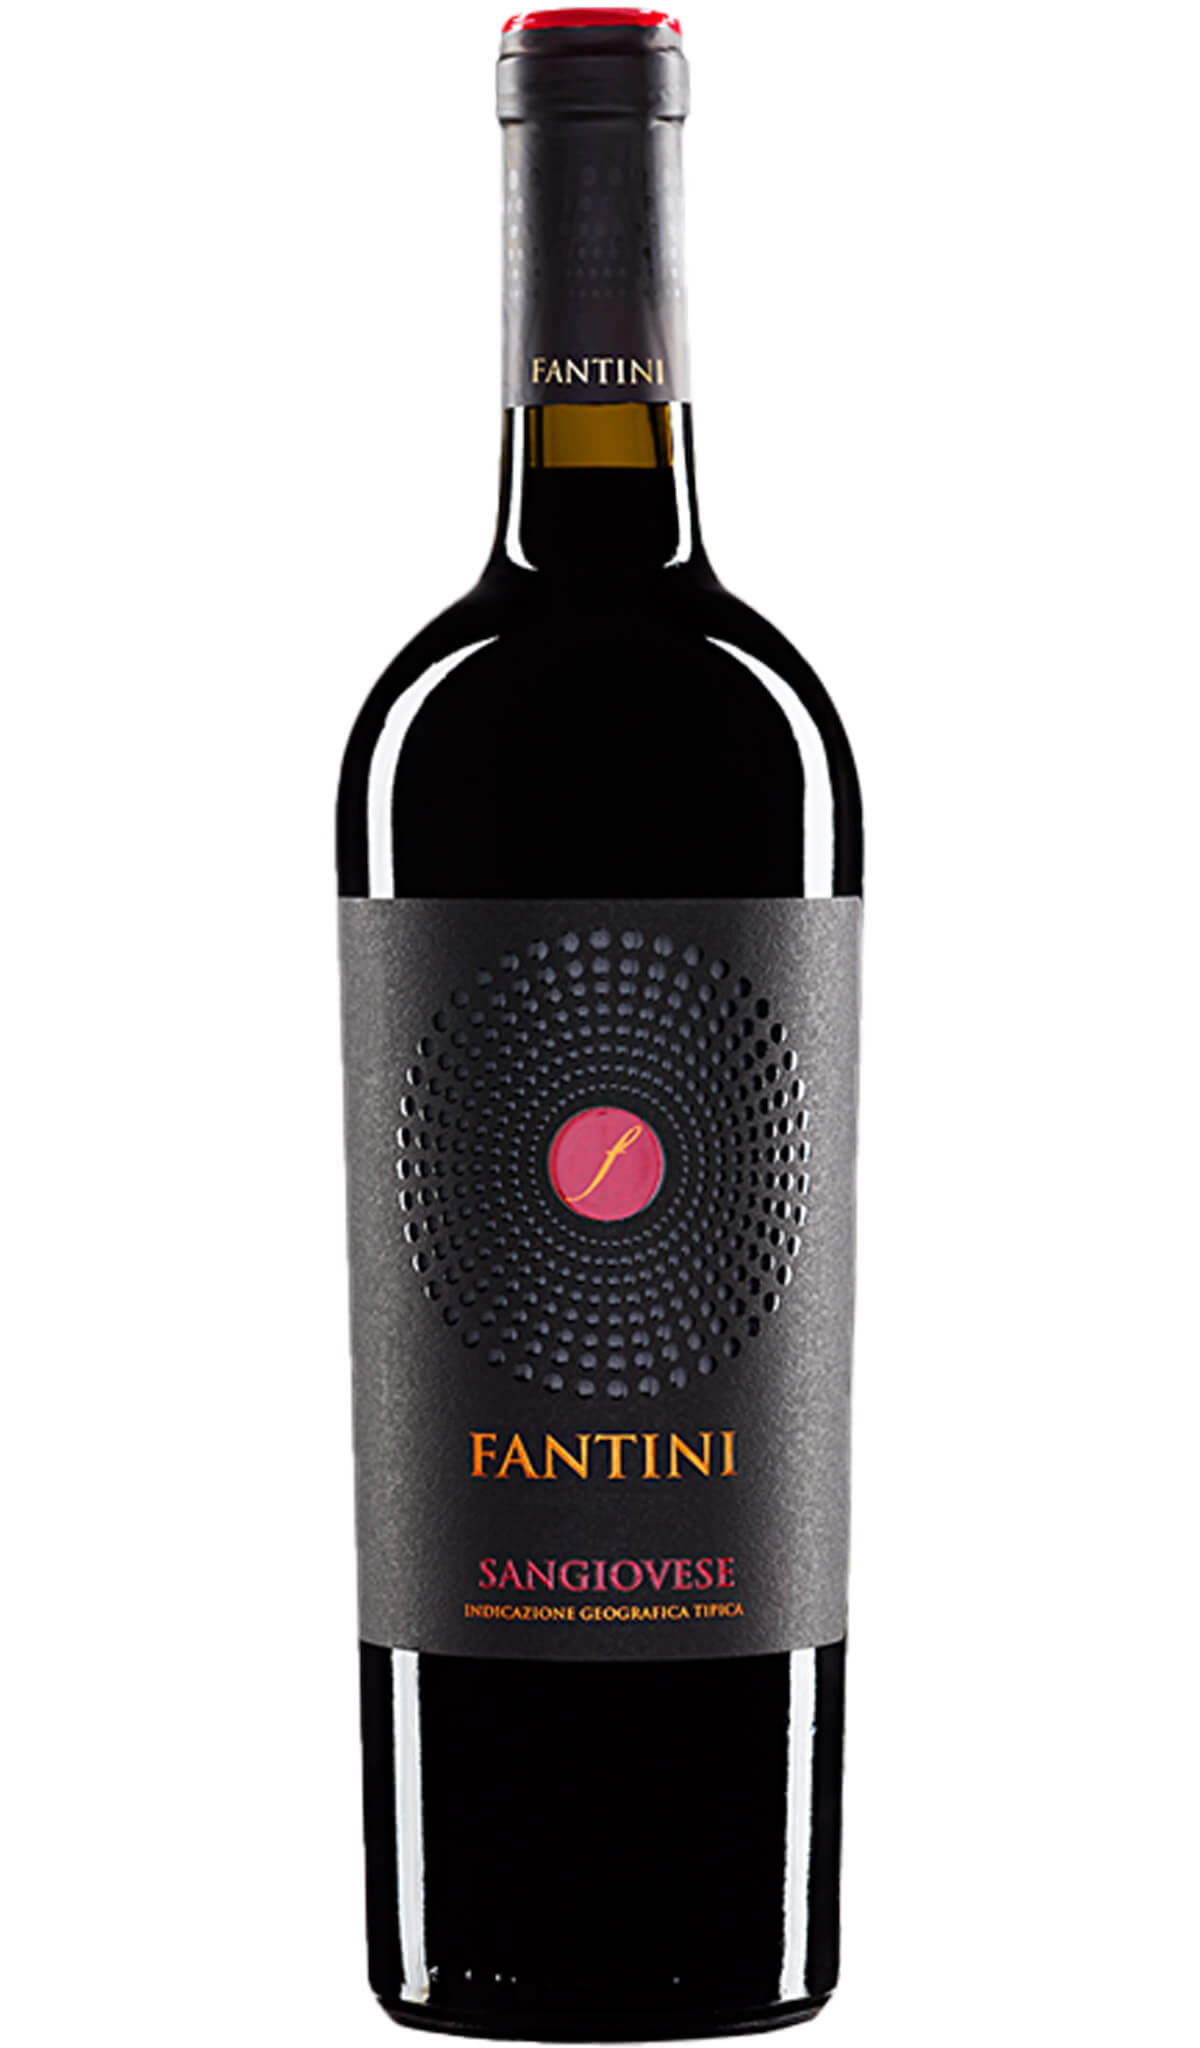 Find out more, explore the range or buy Fantini Sangiovese 2022 (Italy) online at Wine Sellers Direct - Australia’s independent liquor specialists.